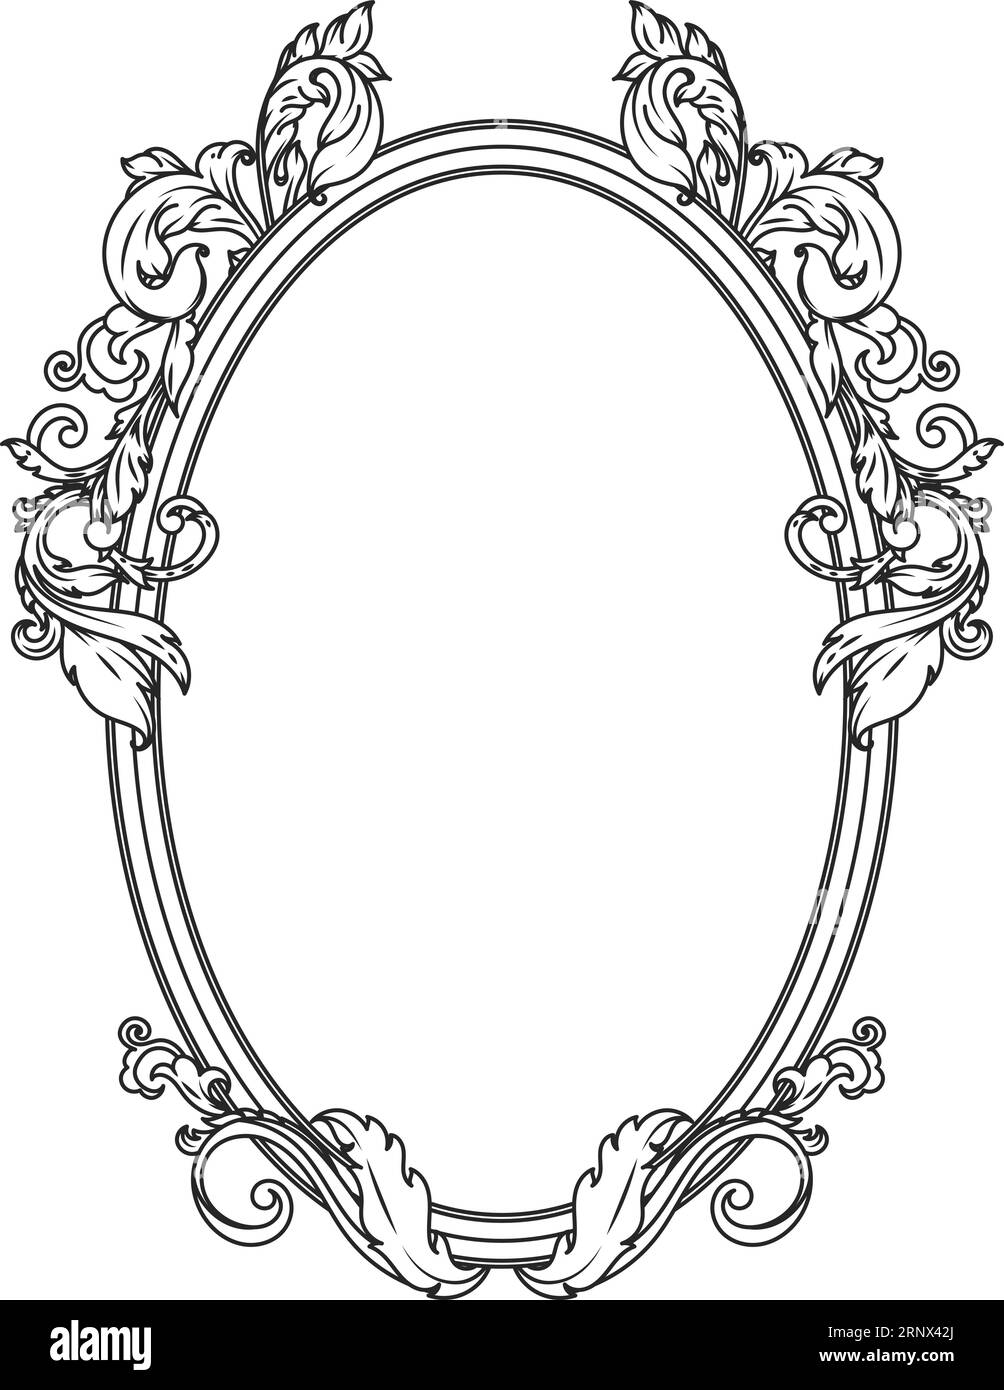 Baroque circle engraving with decorative filigree leaves Stock Vector